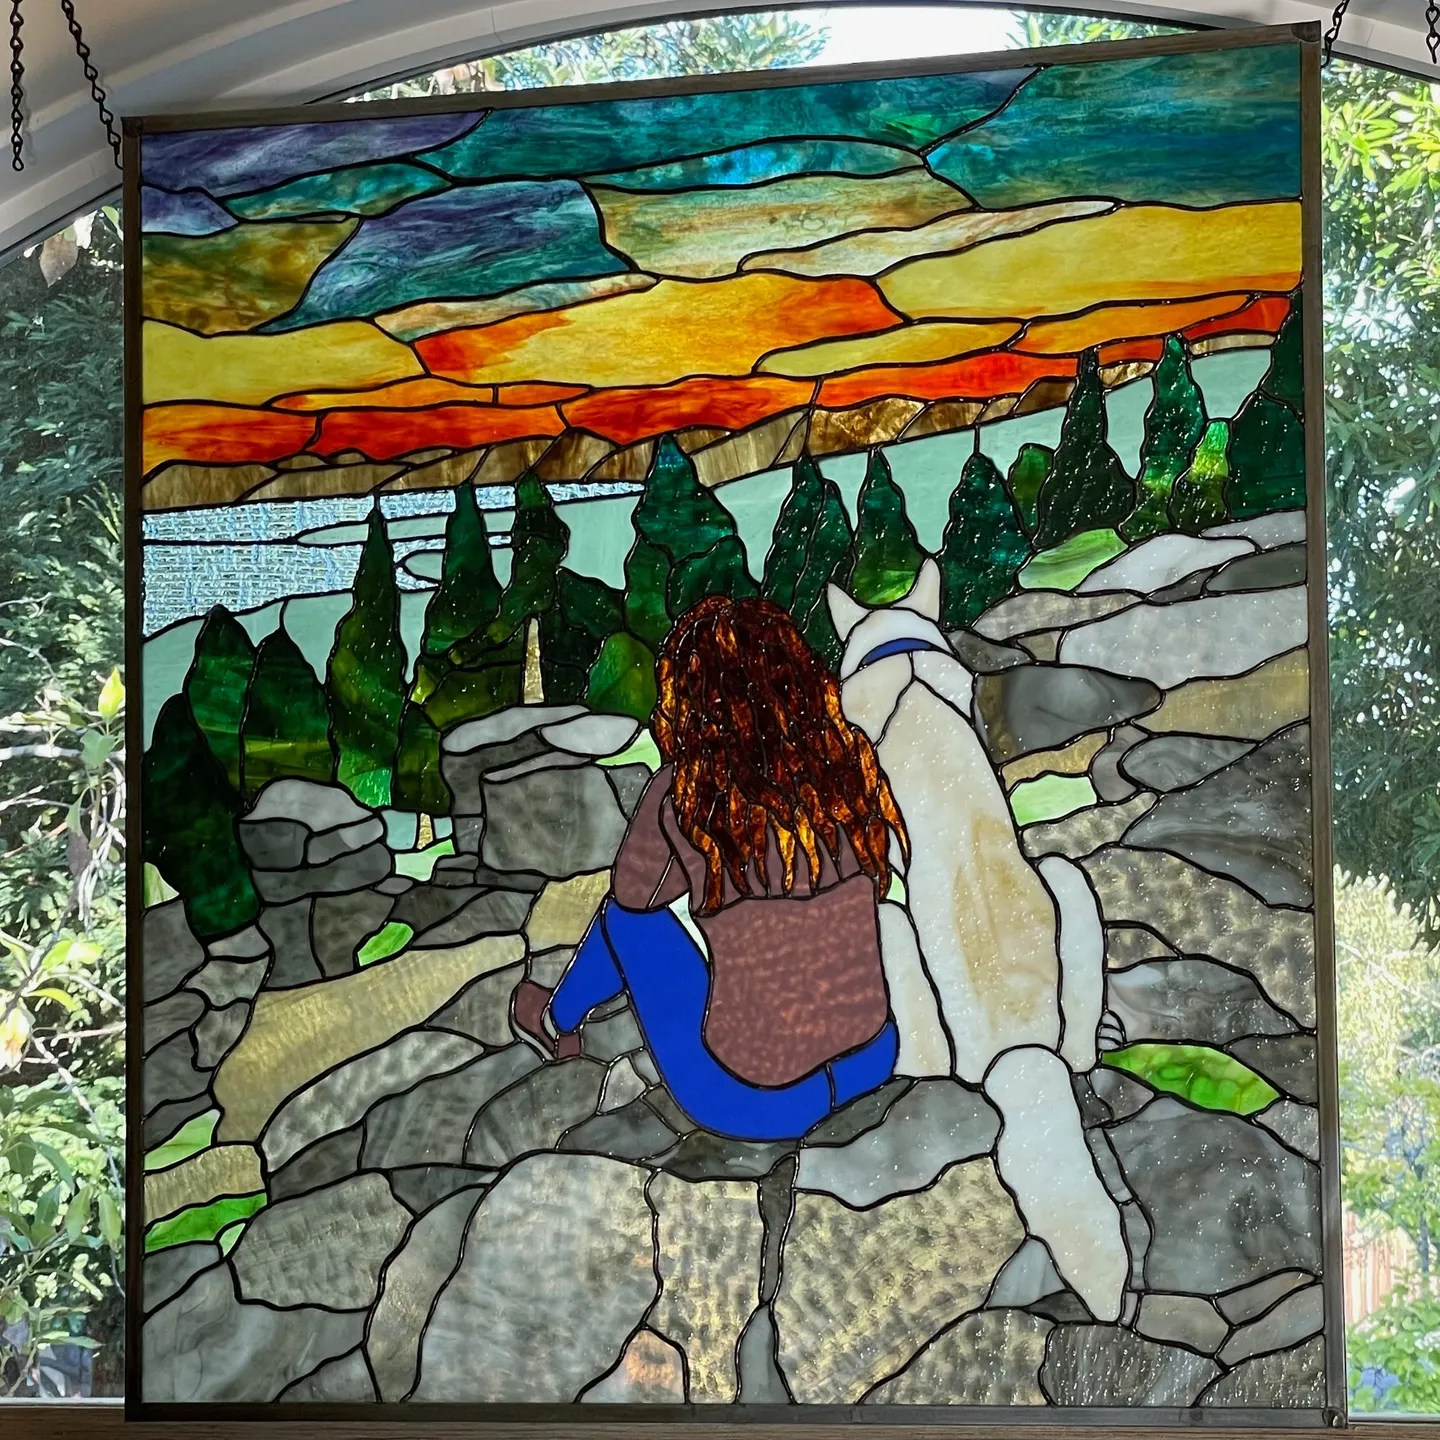 A stained glass window of a woman and her dog.